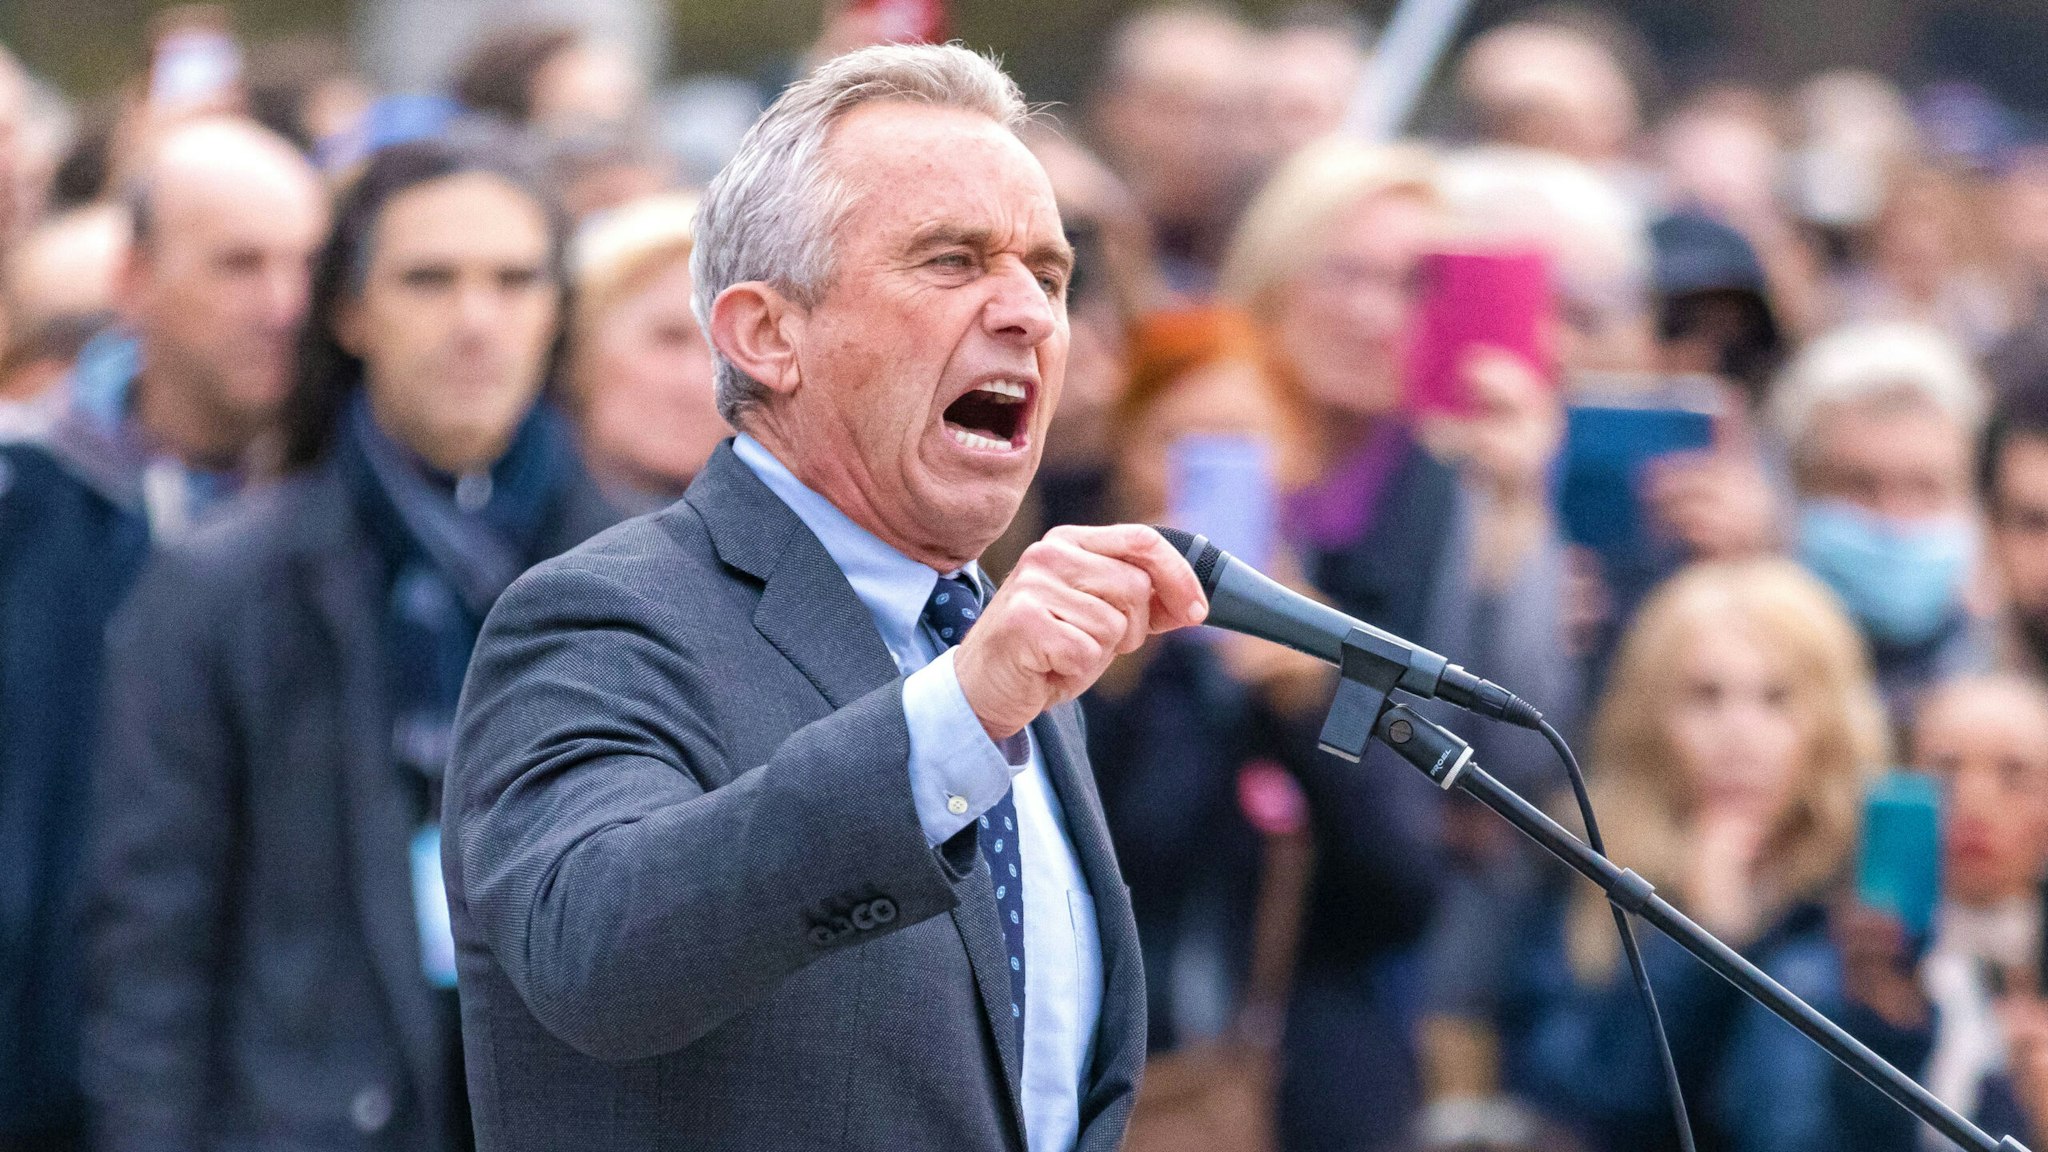 Robert F. Kennedy Jr. attends the No Green Pass protest at Arco Della Pace on November 13, 2021 in Milan, Italy.